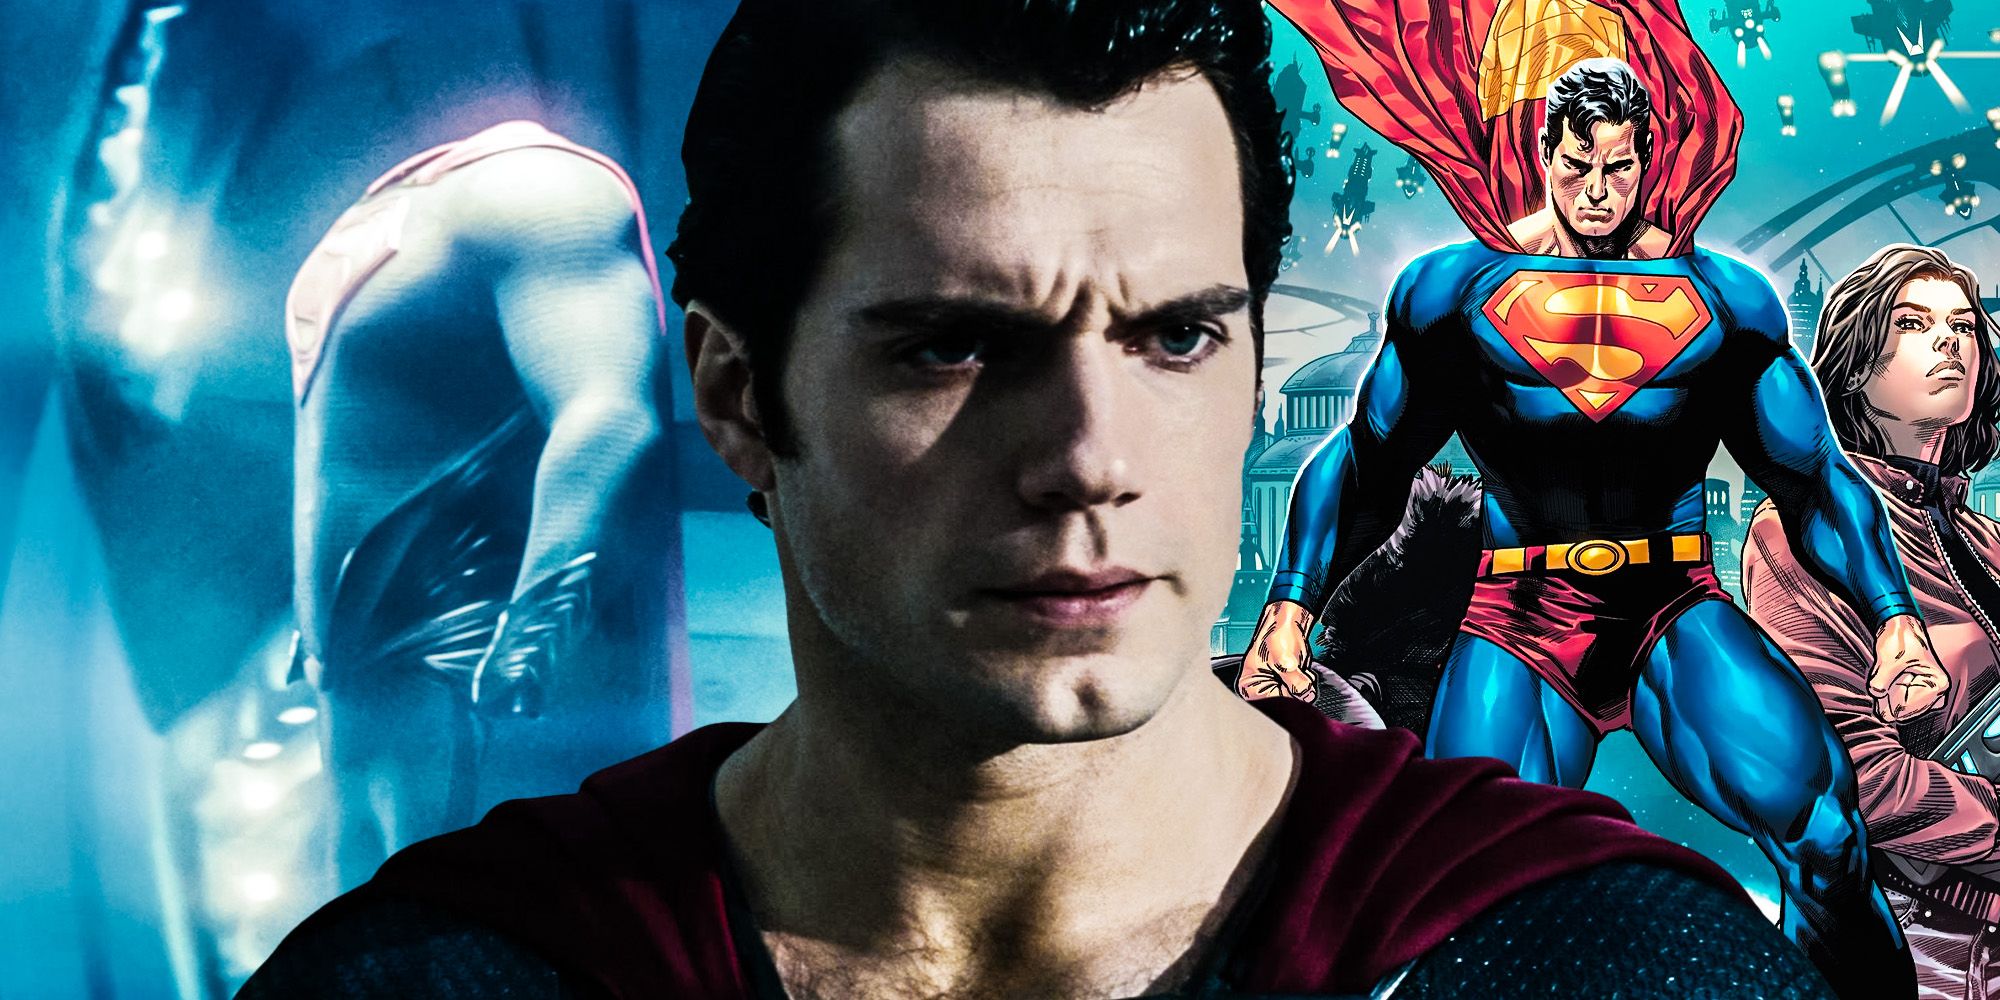 Man Of Steel: Why Cavill's Superman Costume Doesn't Include Red